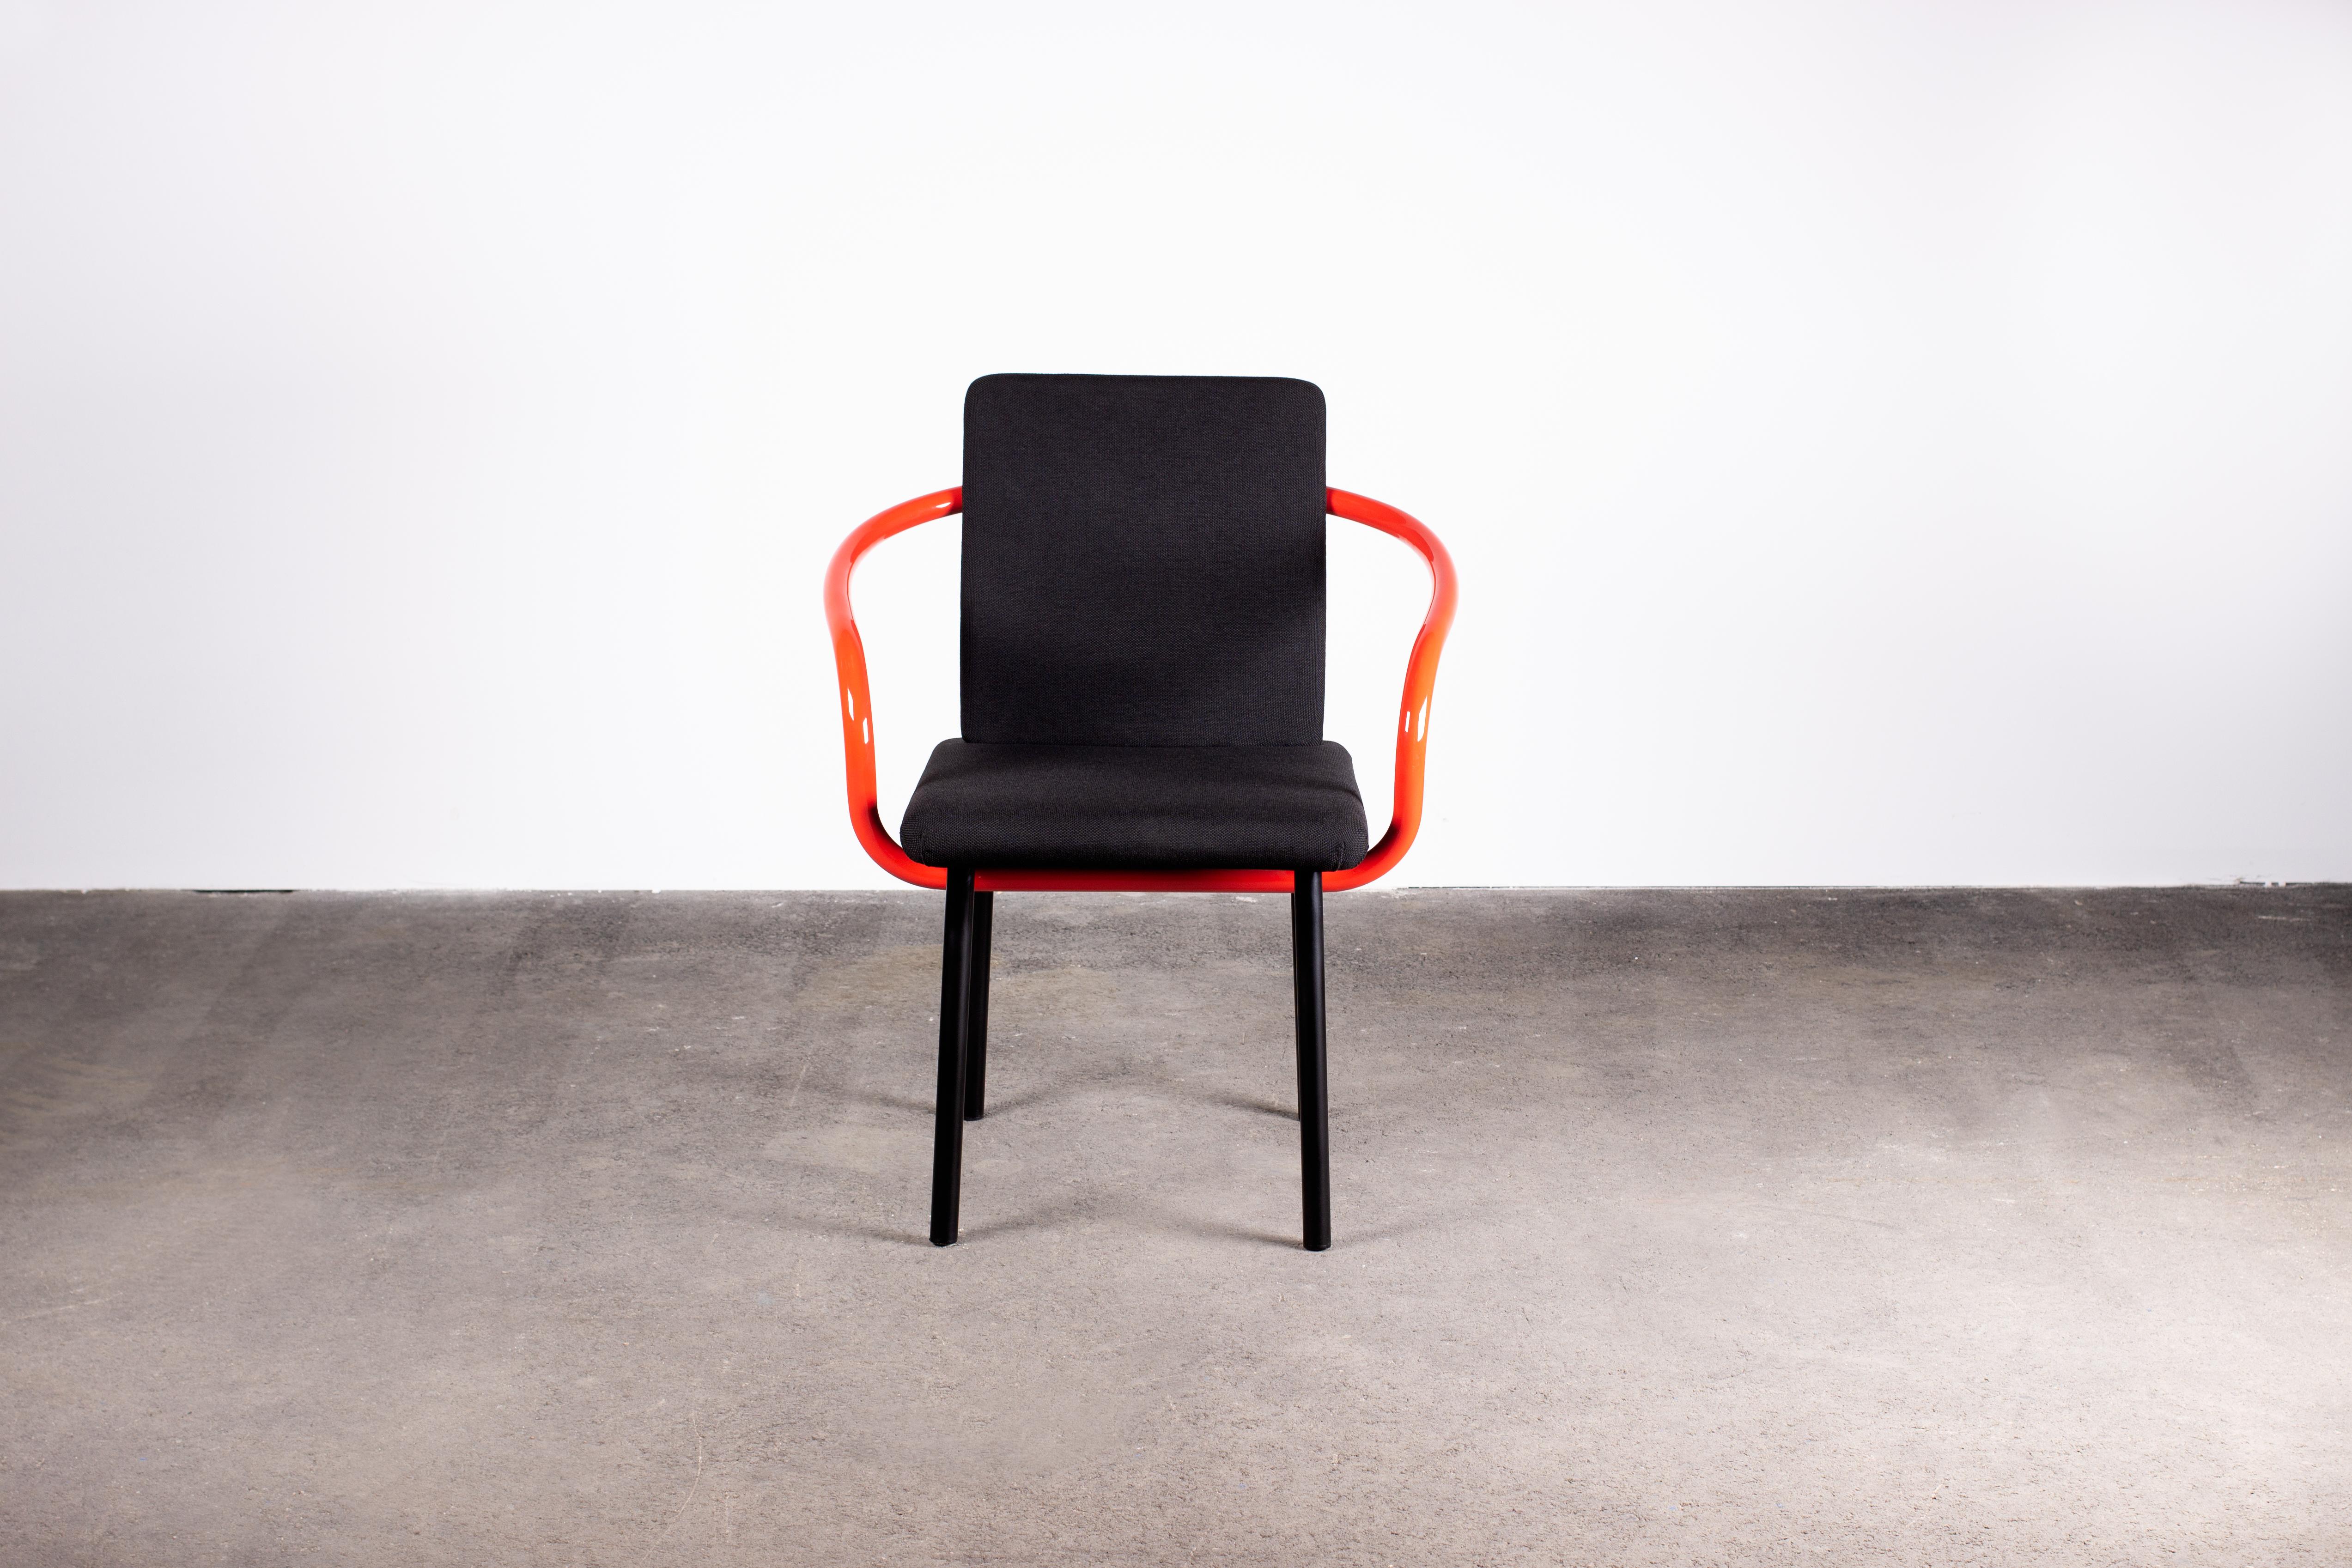 A 1986 design by Ettore Sottsass for Knoll, the Mandarin chair consists of a flat rectangular seat cushion and flat rectangular seat back. Both with rounded corners and upholstered in black fabric. This angular core is wrapped in an unbroken cycle